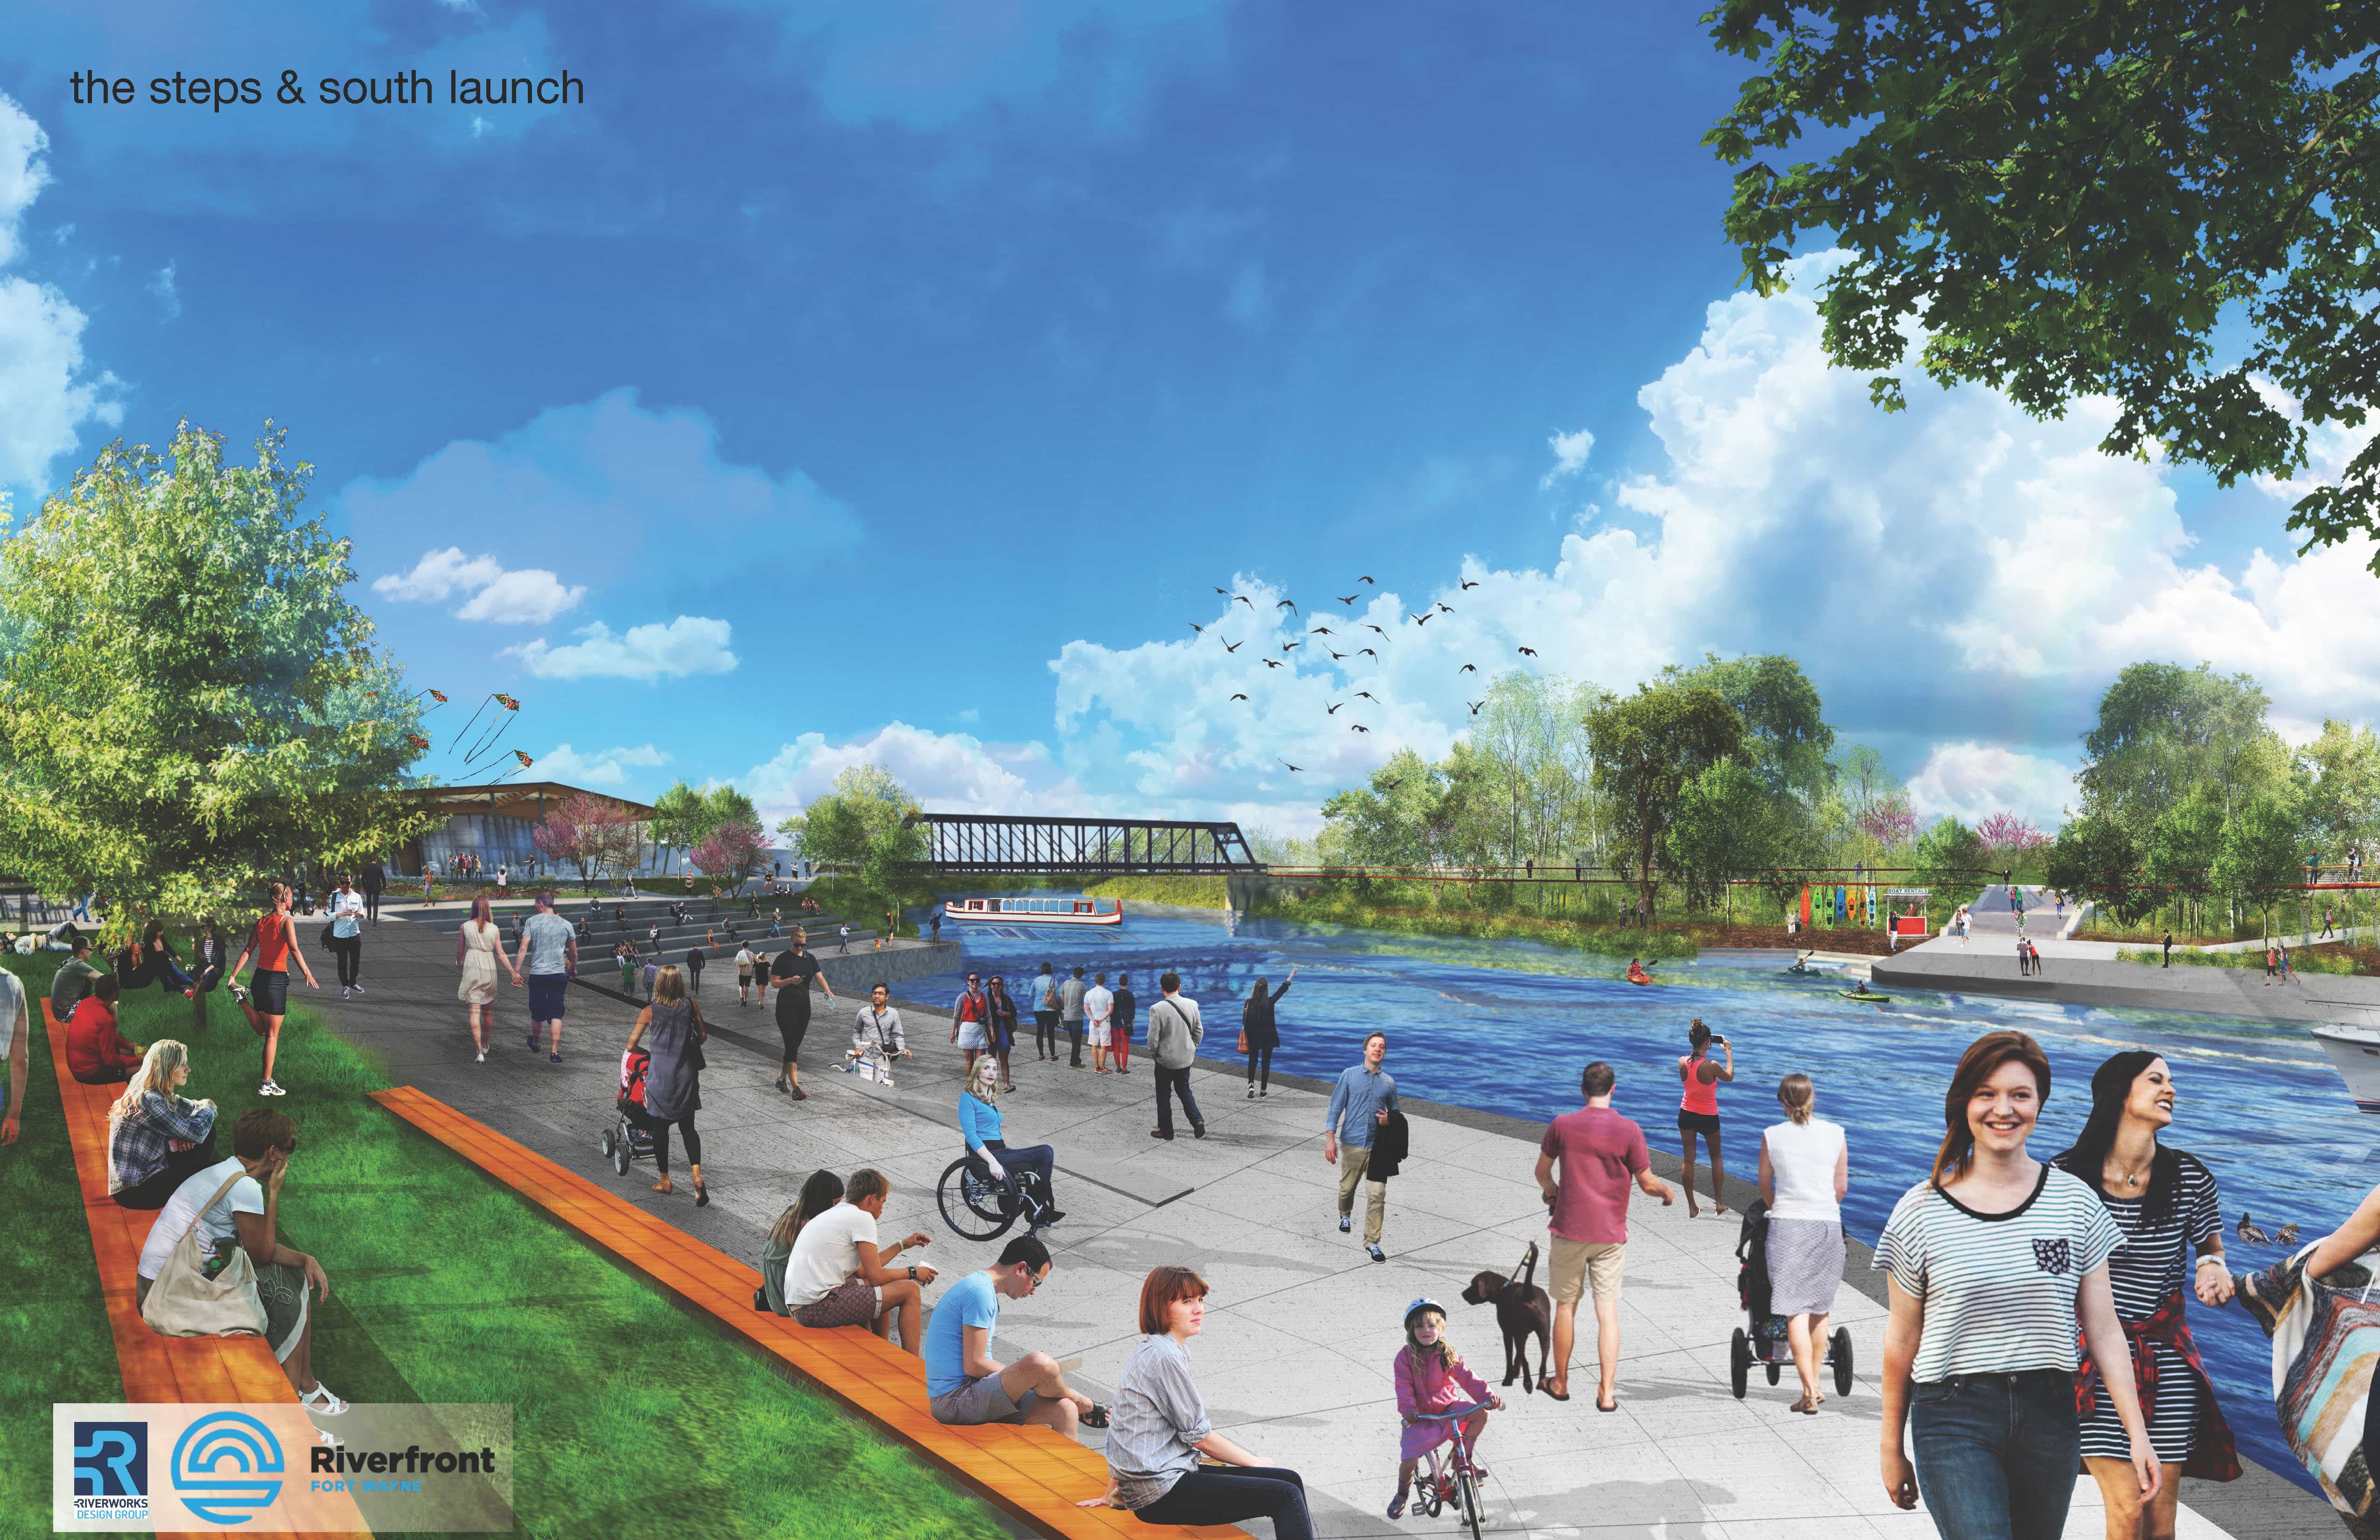 City issues “Request-for-Qualifications” on Riverfront Development